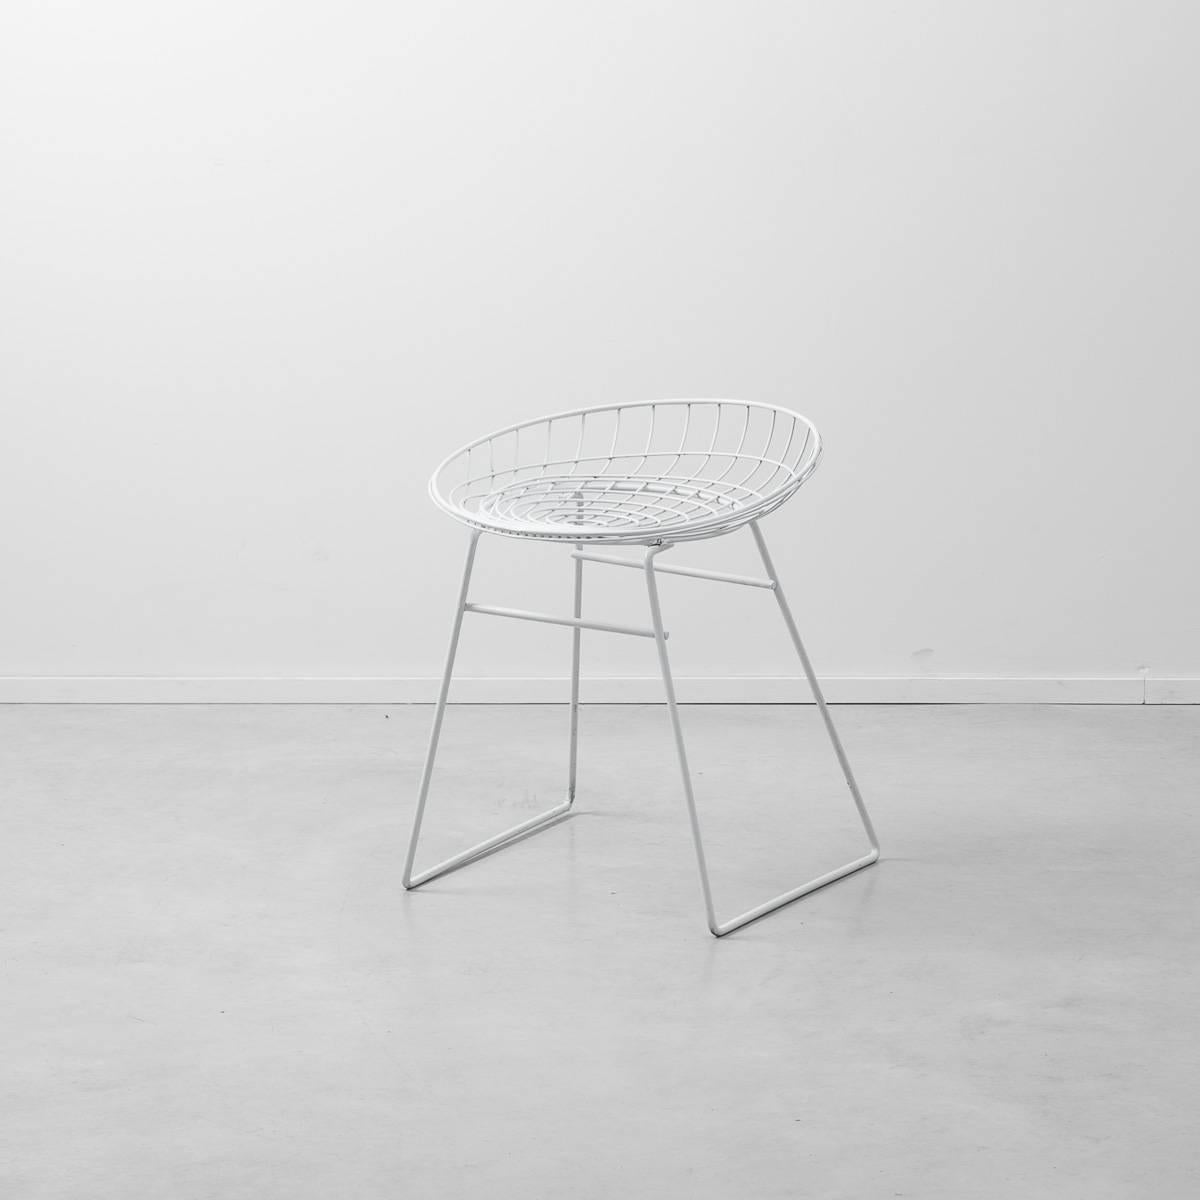 Stool KM05 was one of the first stools to be entirely fabricated from steel wire. This classic design by Cees Braakman, dating from 1958, has since been brought back into production by Pastoe (its original manufacturer). This original piece has been